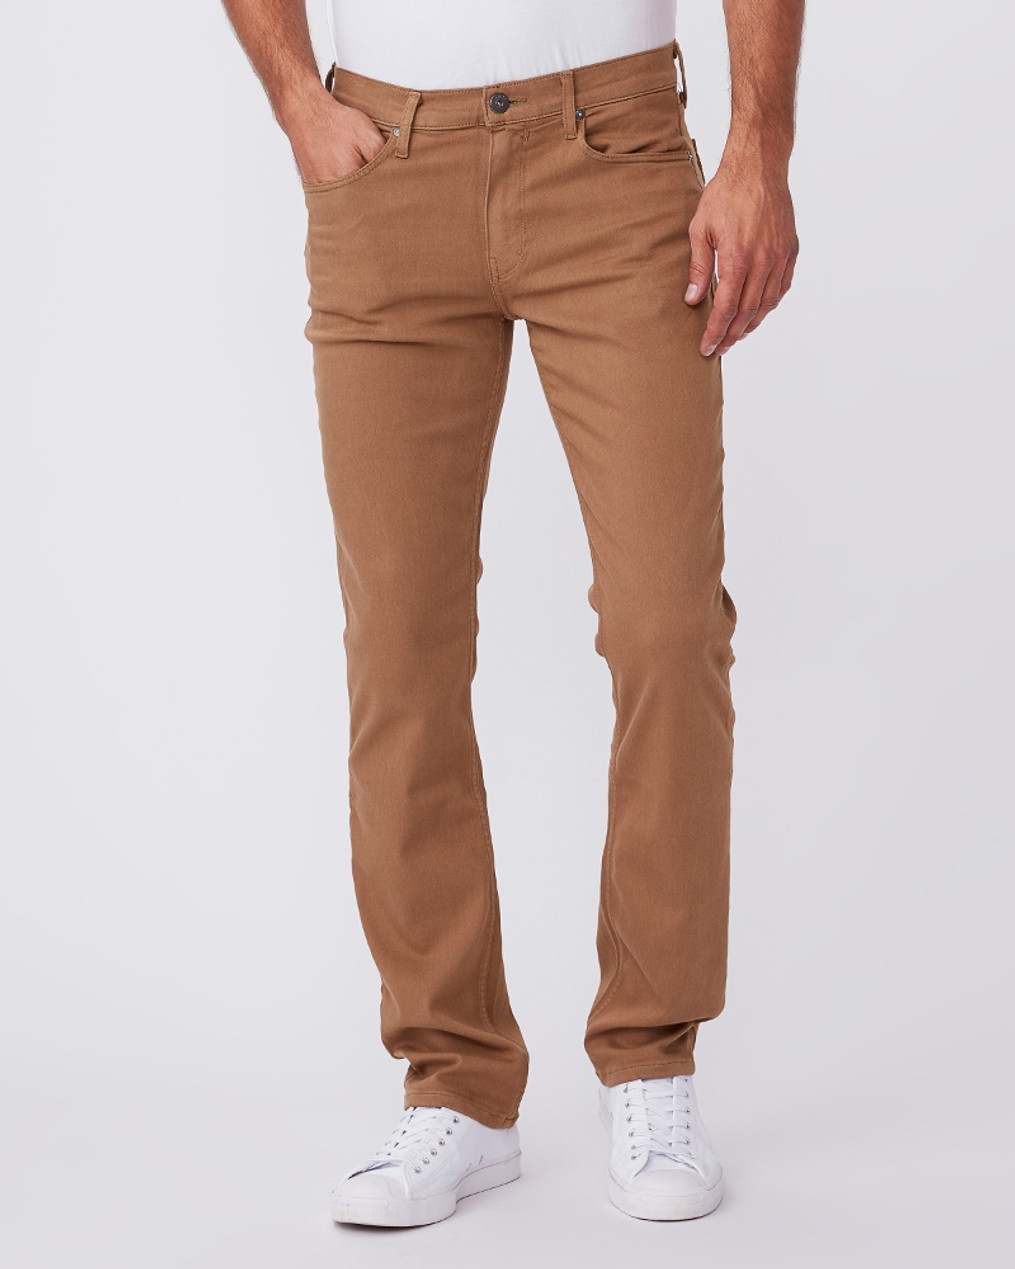 PAIGE Men's Federal Transcend Slim Straight Fit Pant, Toasted